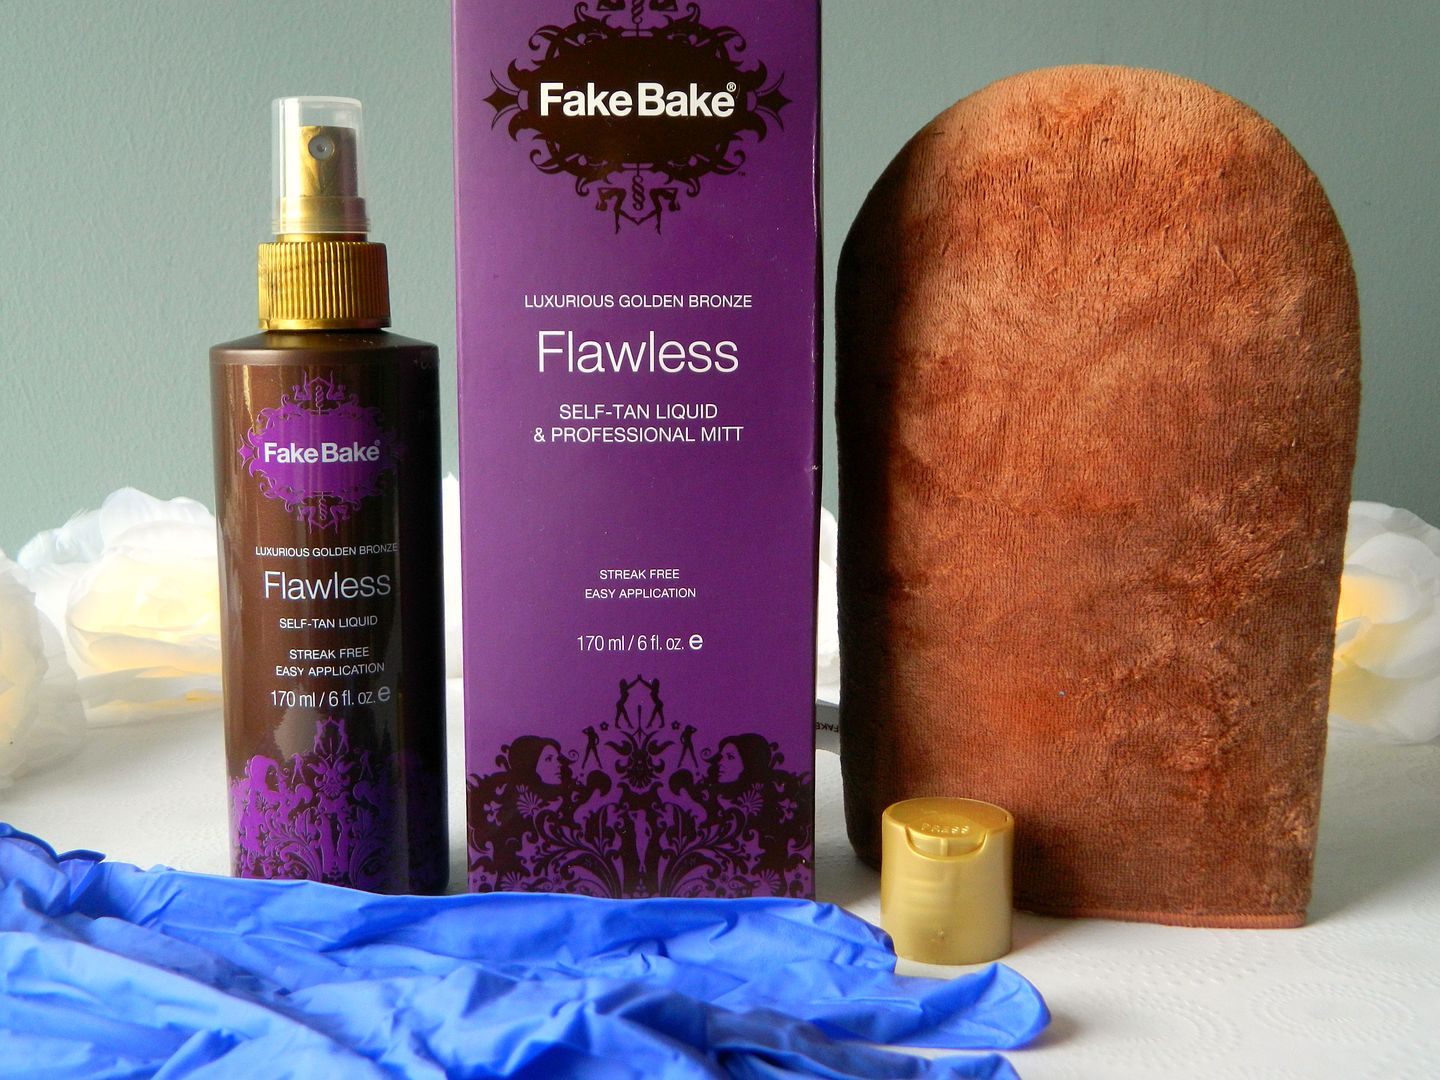 Fake Bake Flawless Self Tan Liquid What Products It Comes With Review Belle-amie